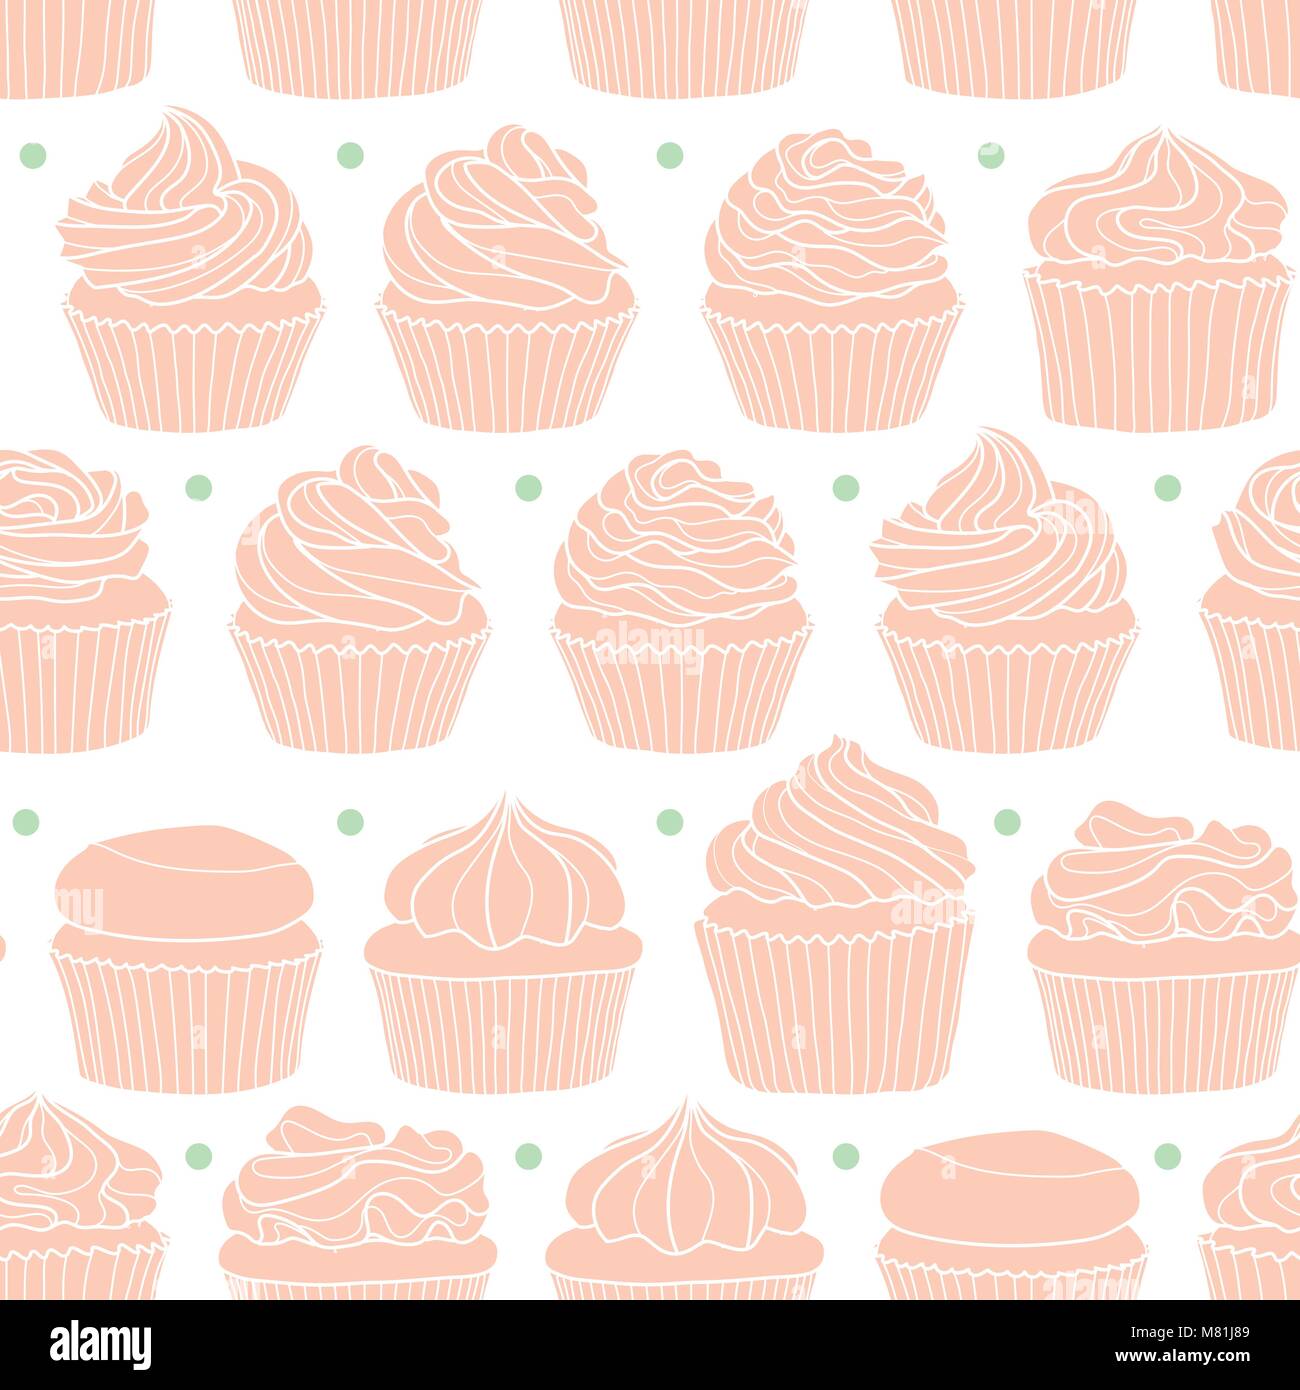 8 styles of cupcake on white background. Cute hand drawn seamless pattern of dessert in pastel pink silhouette and green dot. Stock Vector